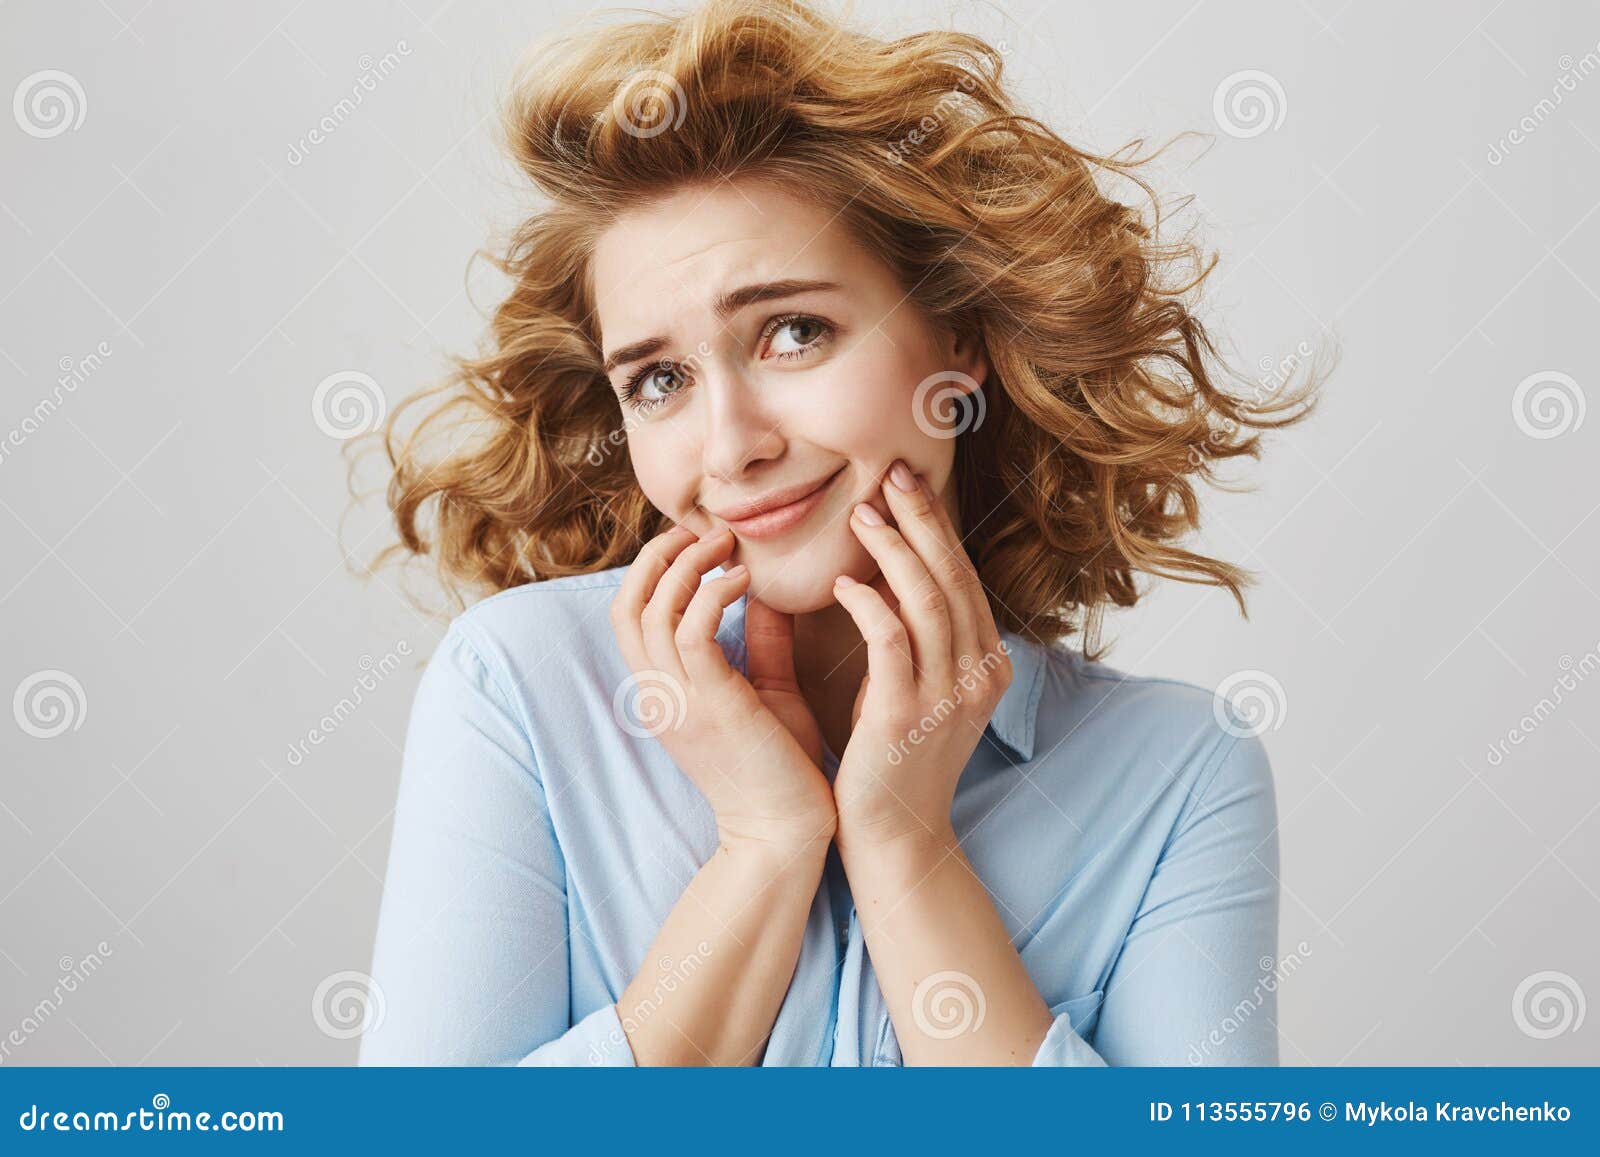 Girl Pretends To Be Melodrama Actress. Cute Funny Woman with Short Curly  Hair Standing on Wind with Hair that Floats on Stock Photo - Image of girl,  joyful: 113555796